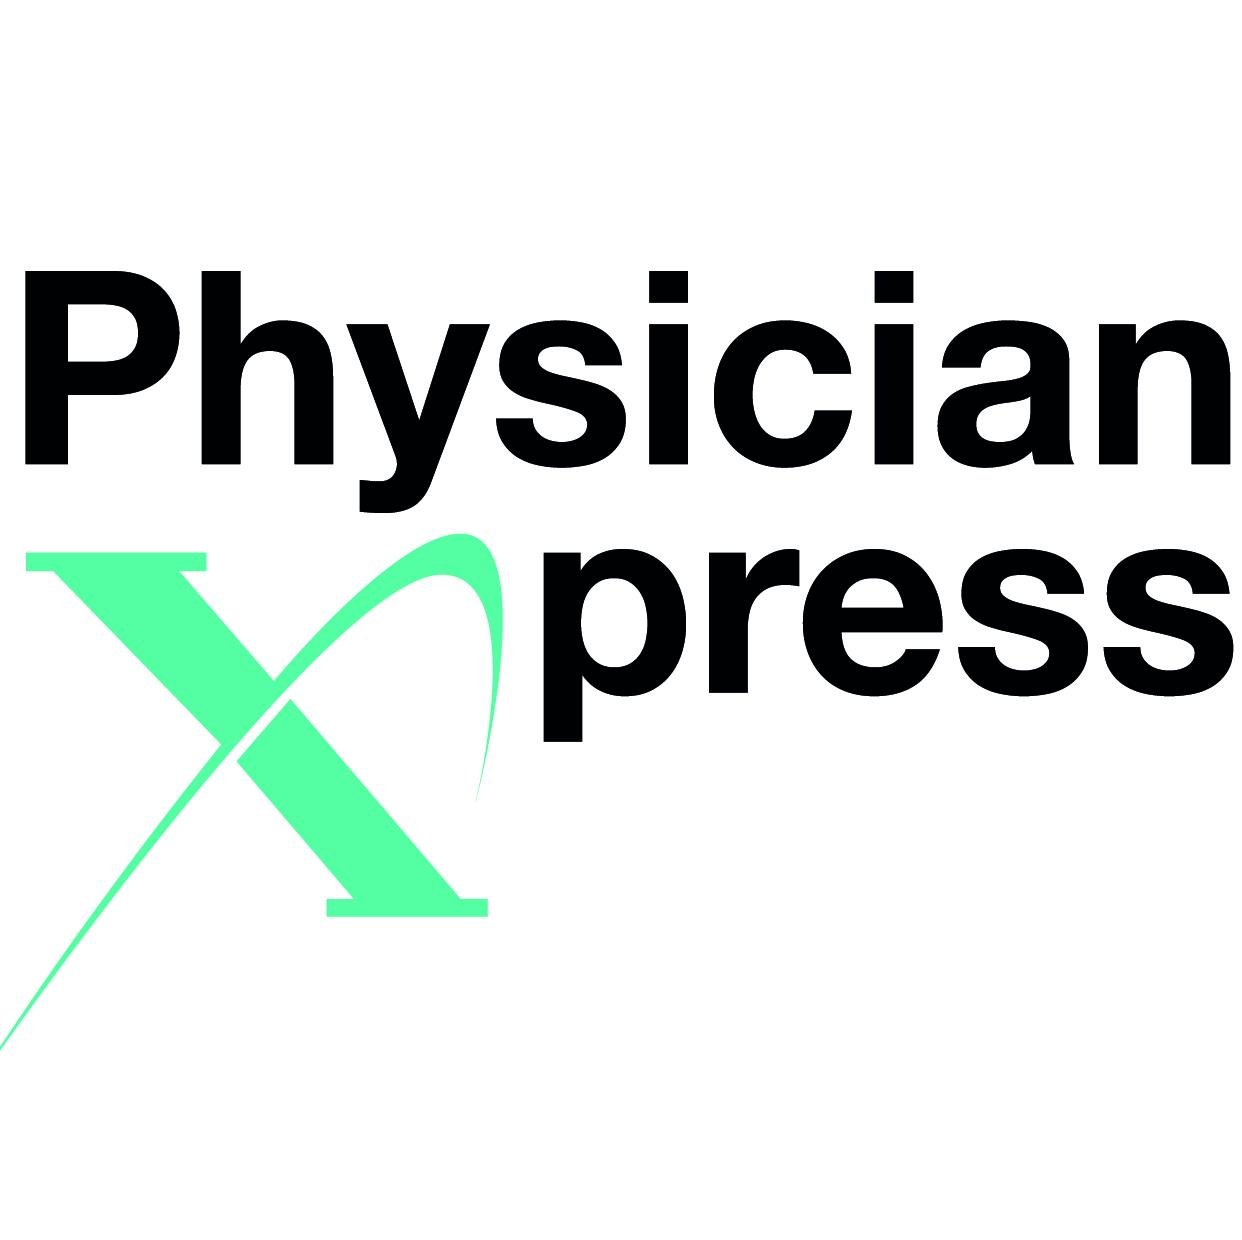 PhysicianXpress provides specialized medical revenue management services that leads to the highest profitability for our clients.